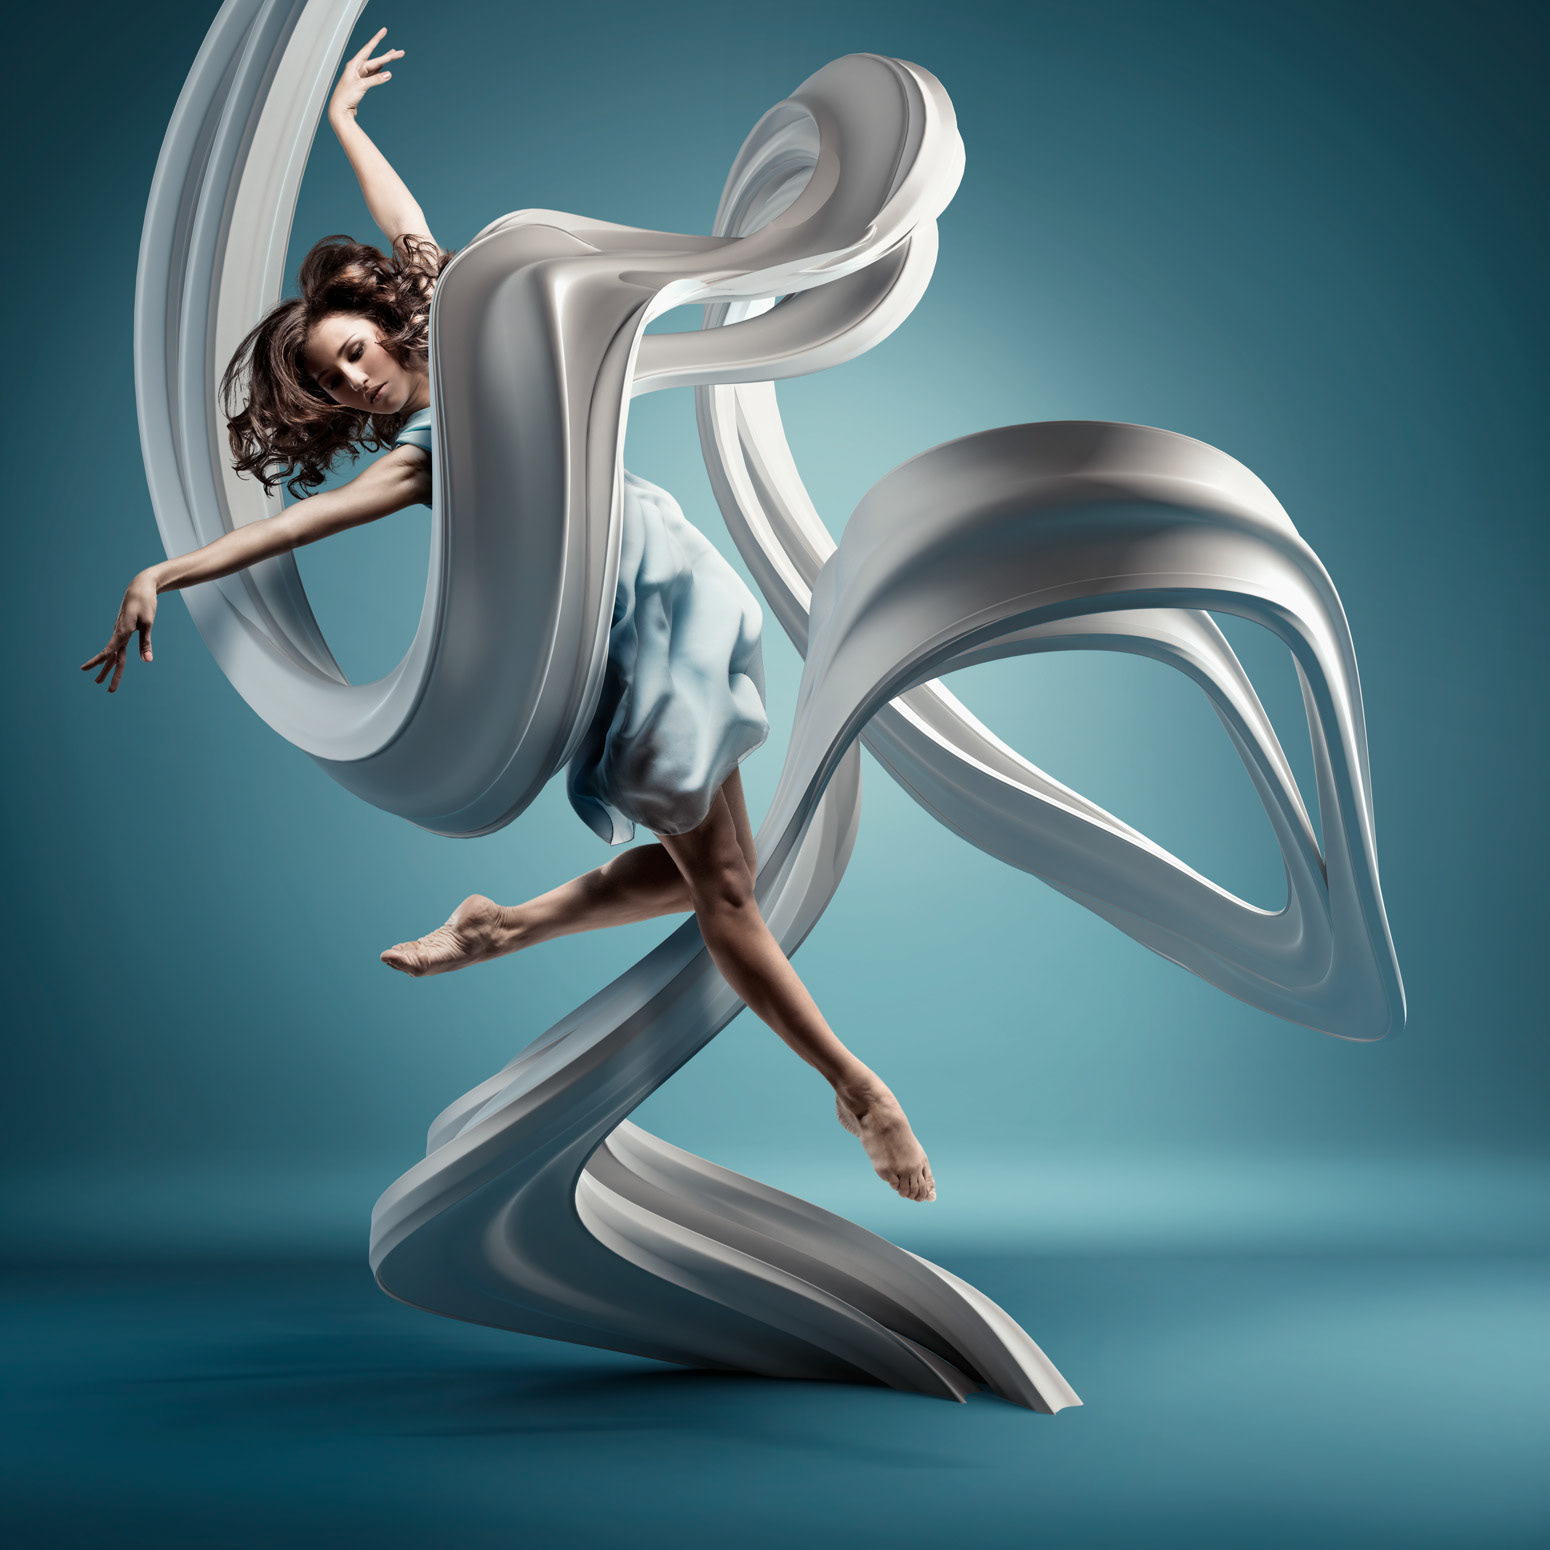 Mike Campau: Digital Artist - Combining Photography and CGI - MOTION ...